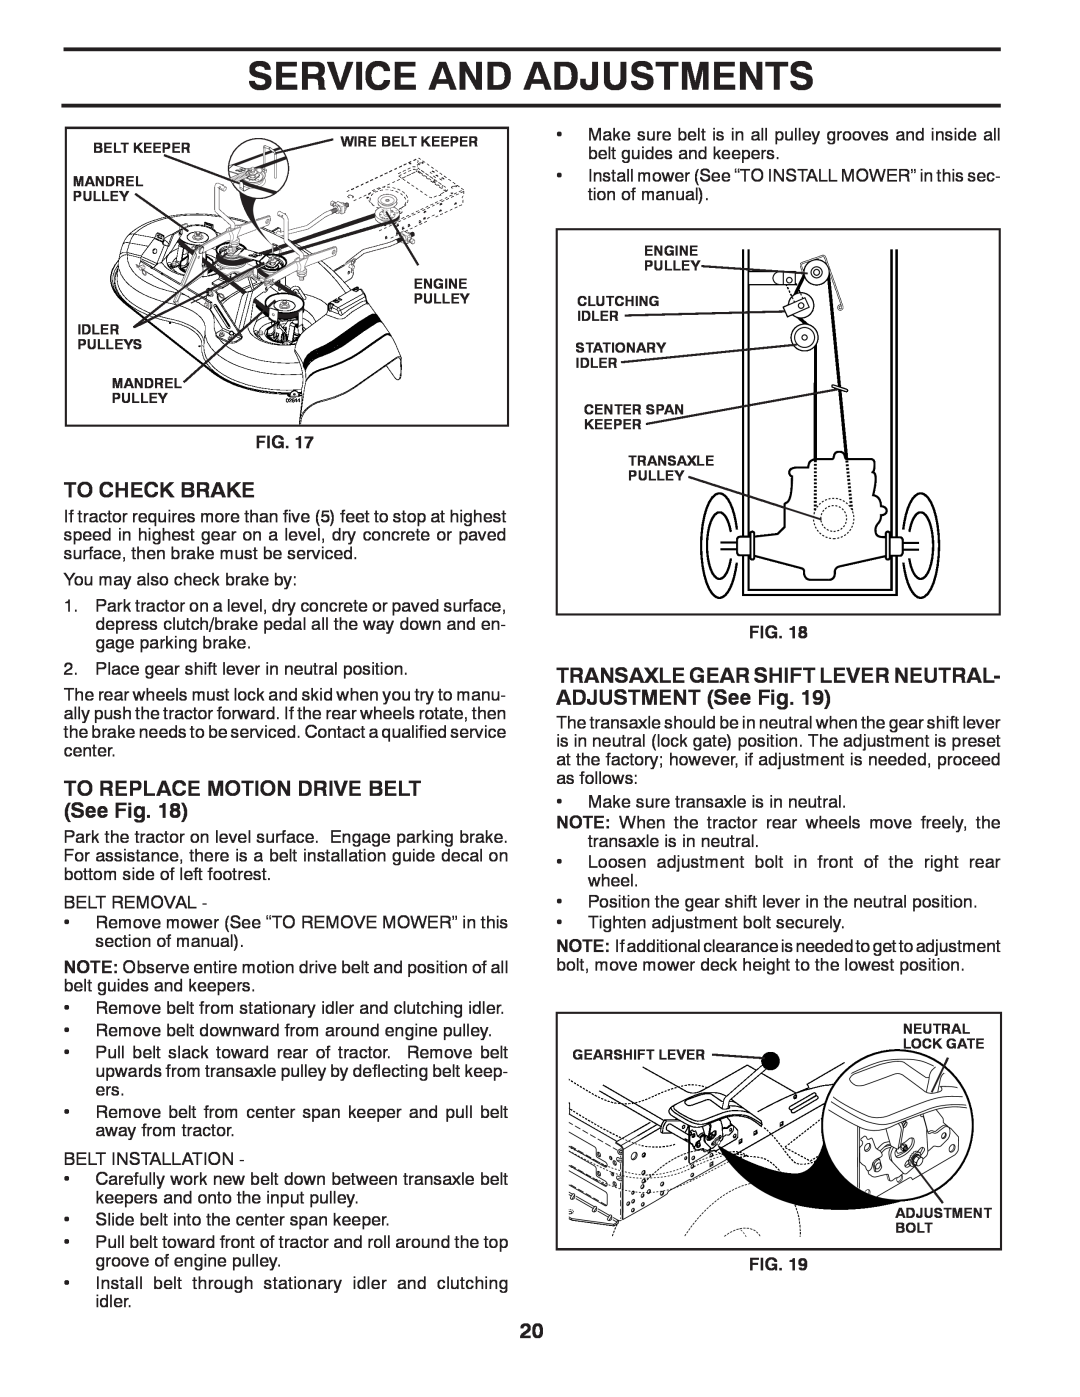 Poulan PP14538 manual To Check Brake, TO REPLACE MOTION DRIVE BELT See Fig, Service And Adjustments 